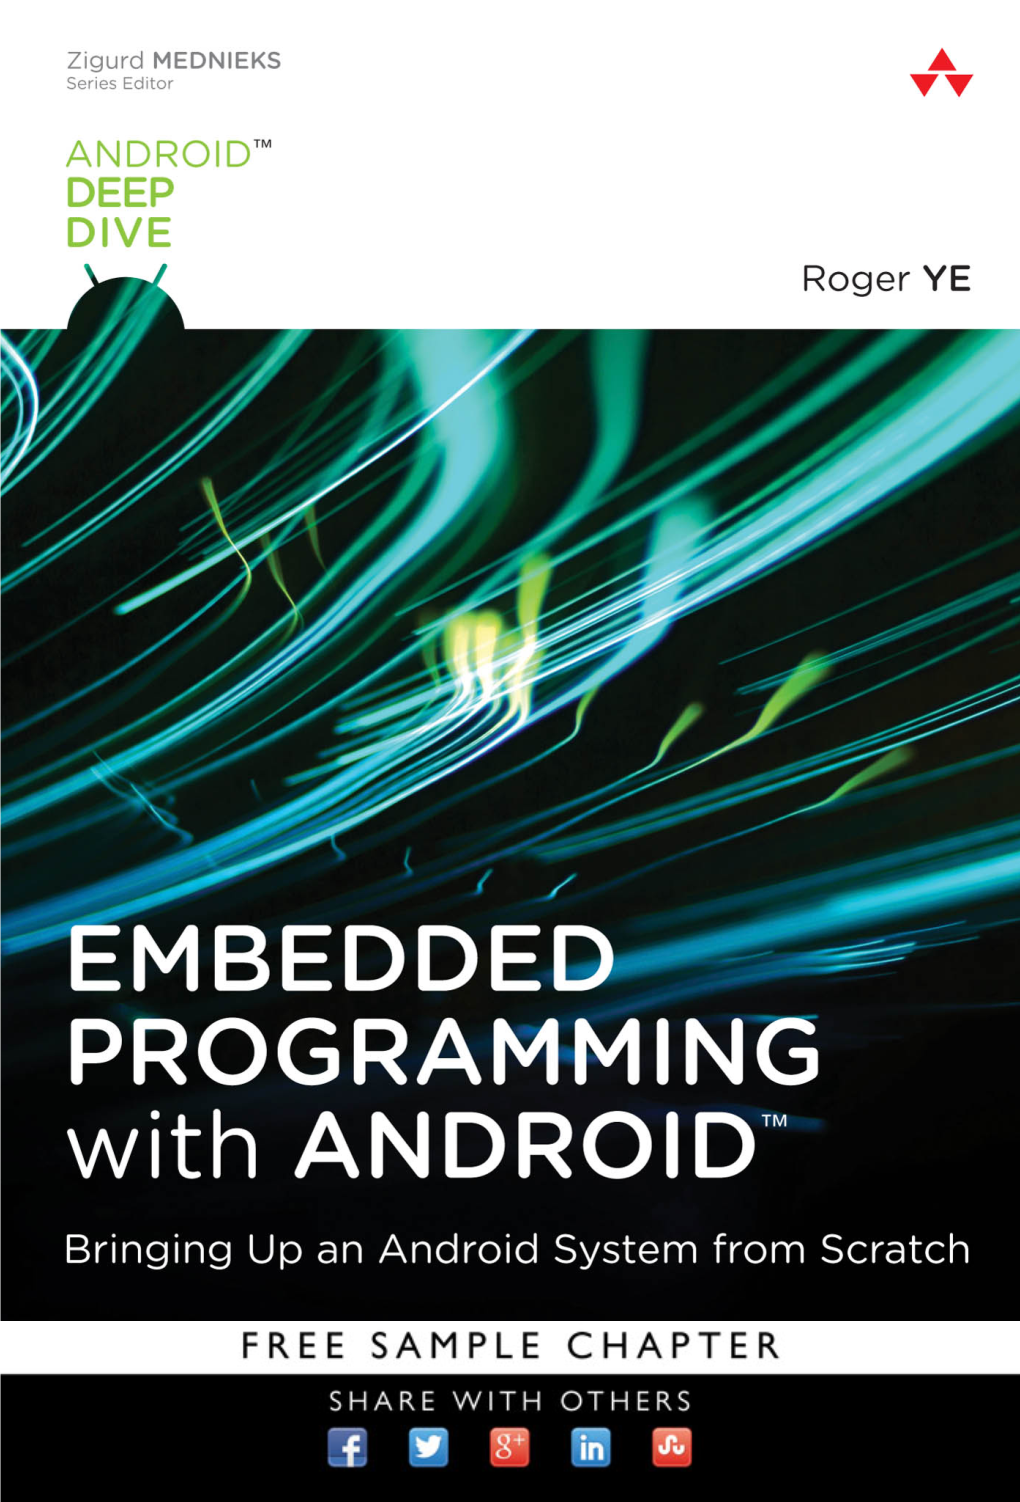 Embedded Programming with Android™ About the Android Deep Dive Series Zigurd Mednieks, Series Editor